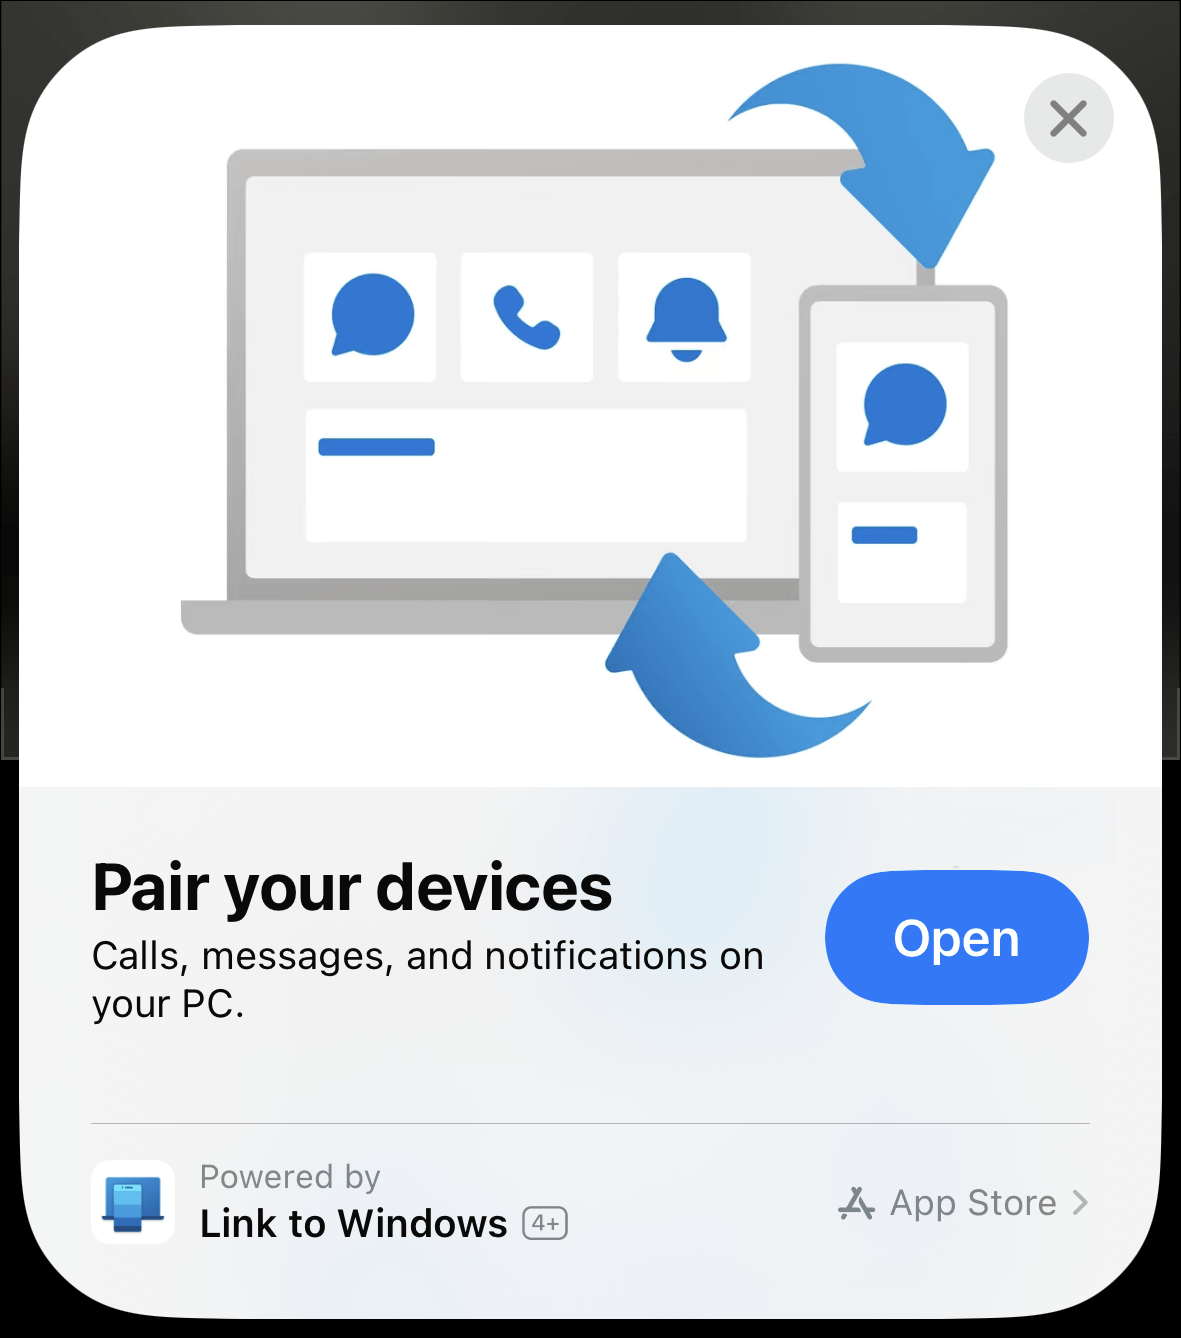 confirm the code to pair the devices